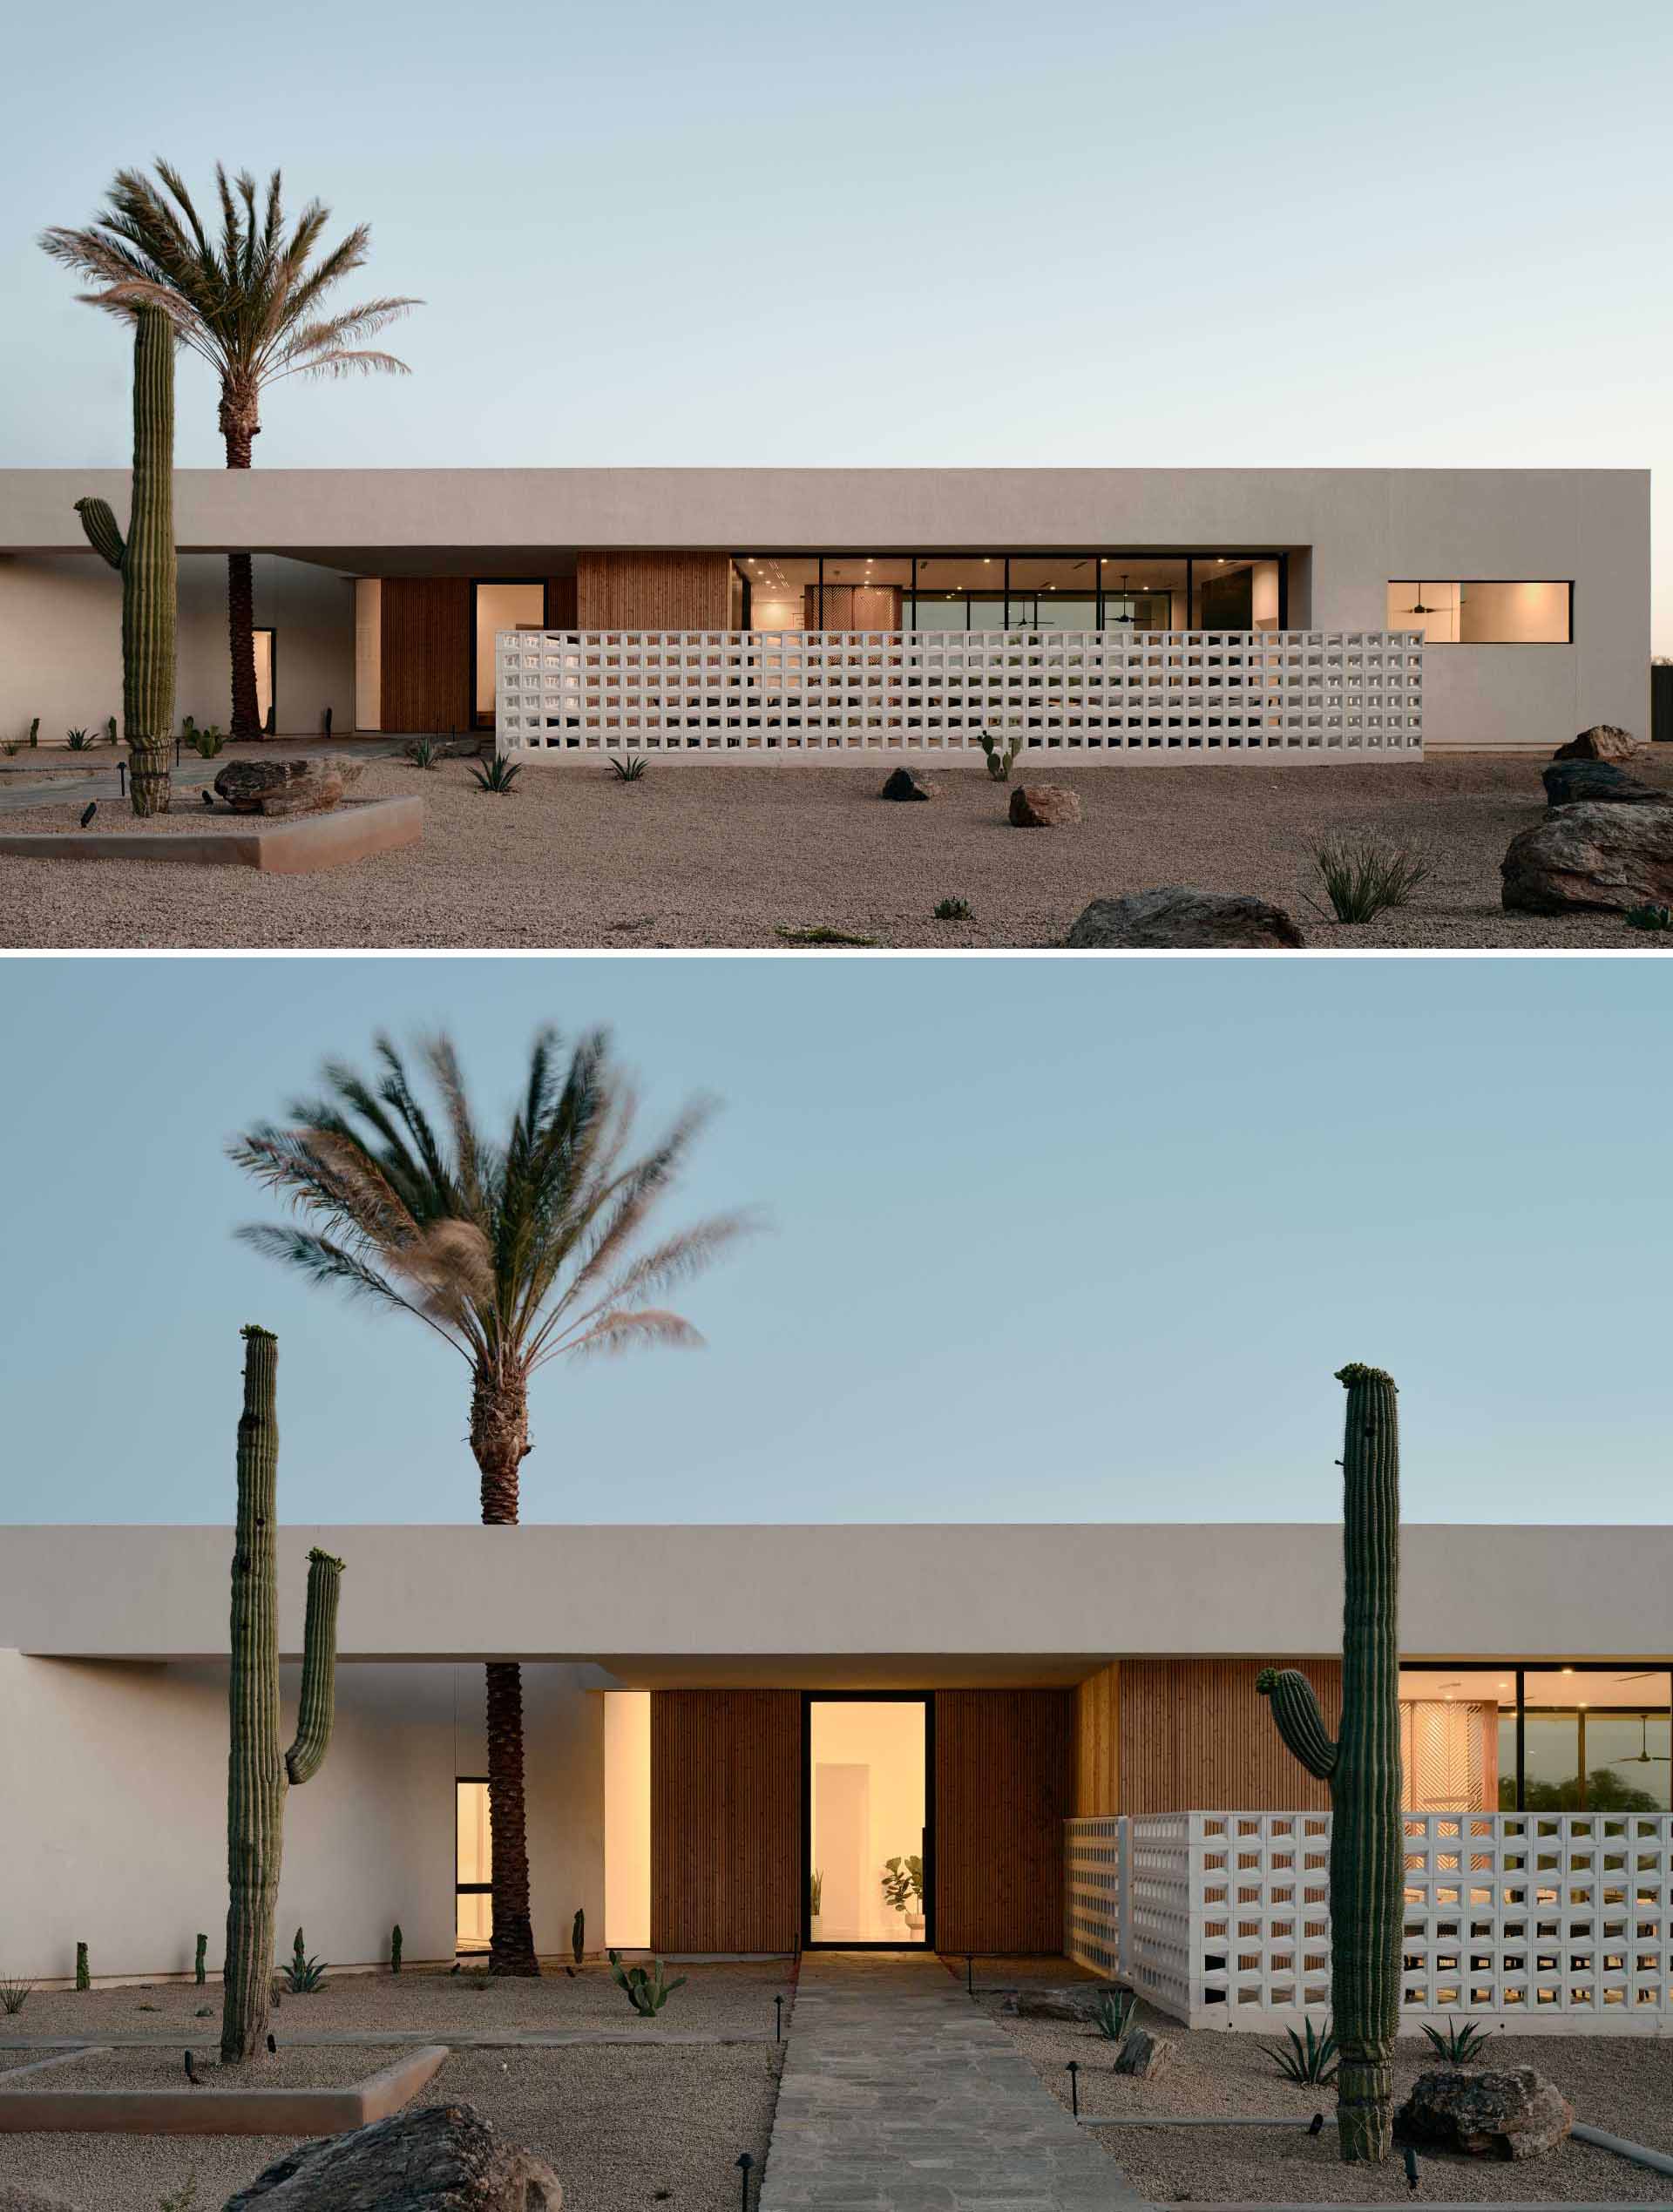 The entry of this house is highlighted by a singular date palm tree growing through a triangular aperture to the sky.